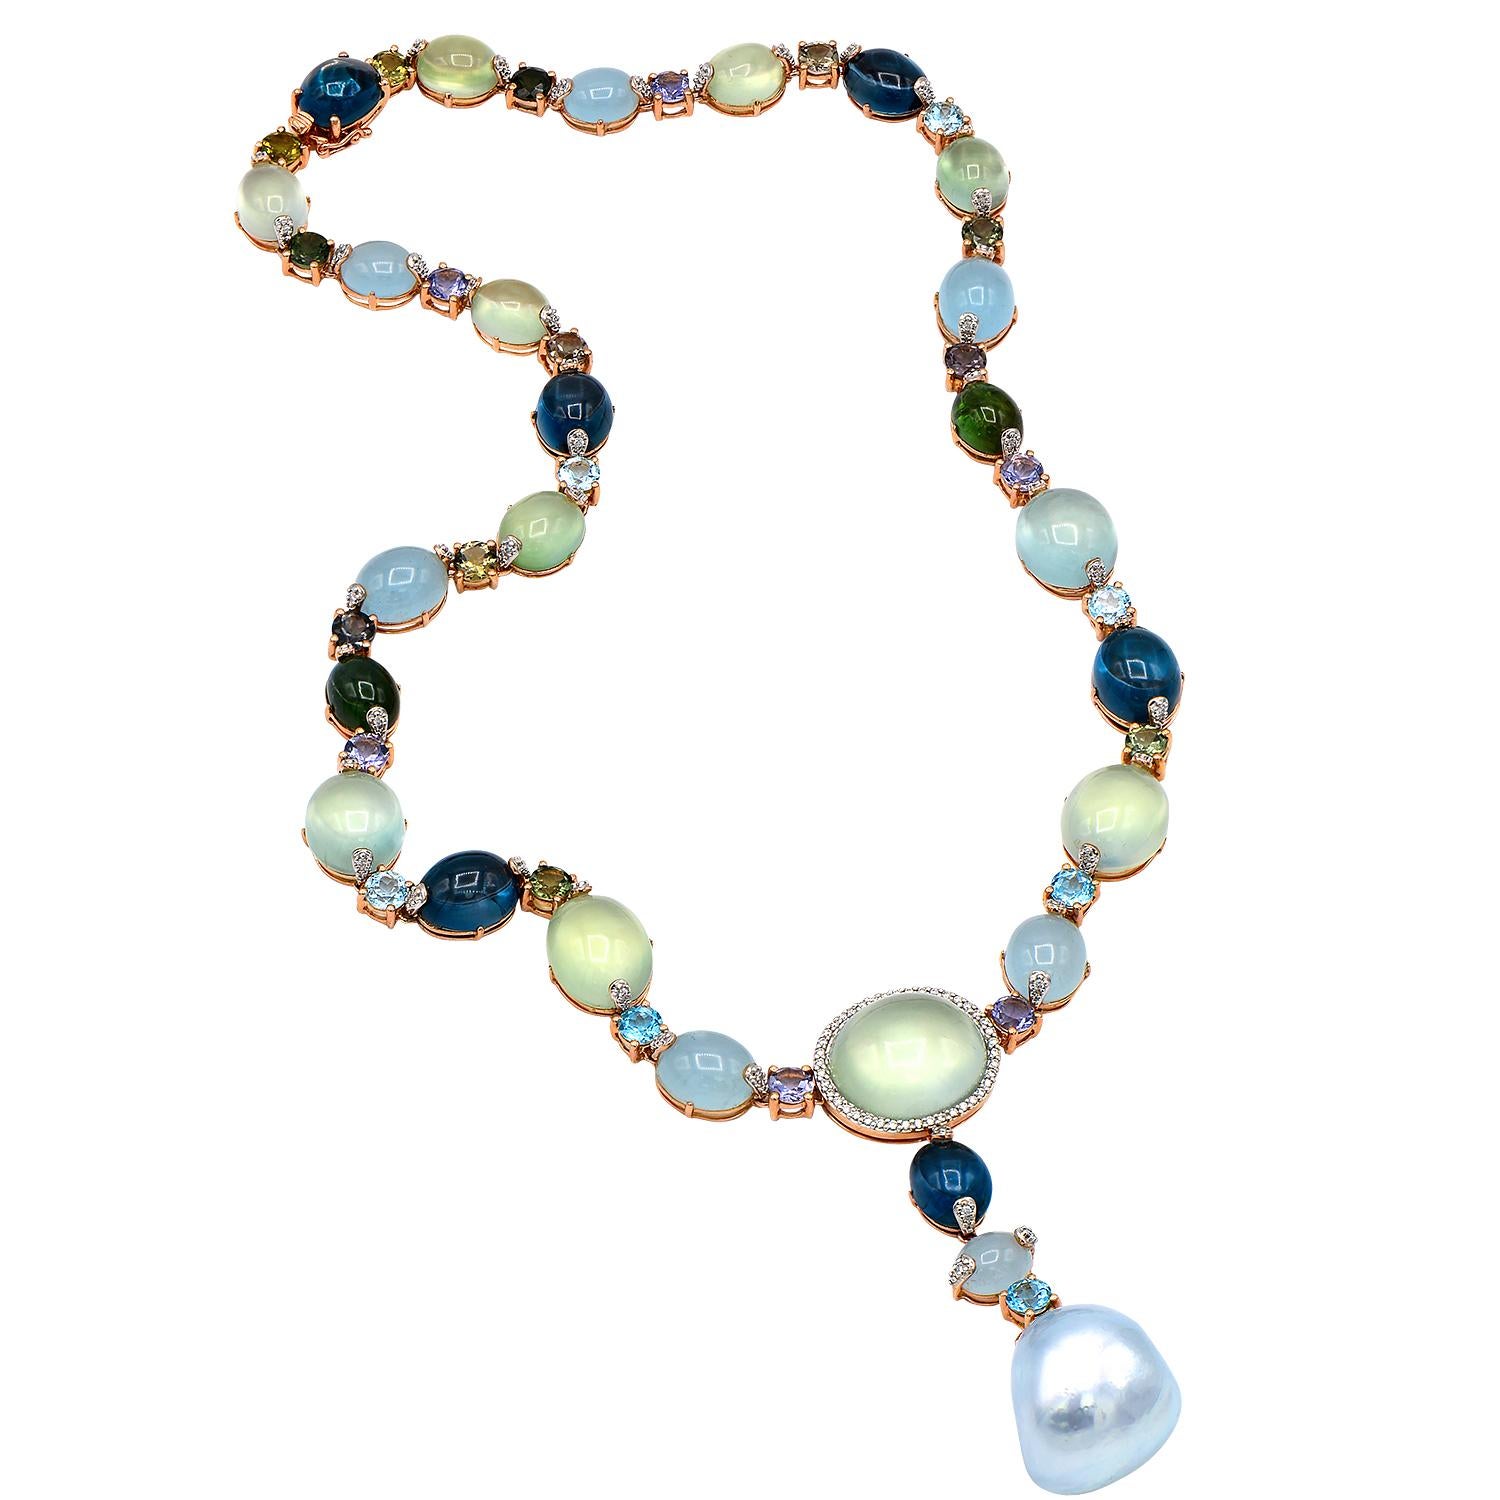 This unique and stunning necklace is guaranteed to be the finishing touch for any occasion. This necklace is made from 34 grams of 18 karat rose gold. Set along the entire necklace are various semiprecious gemstones including aquamarine, London blue